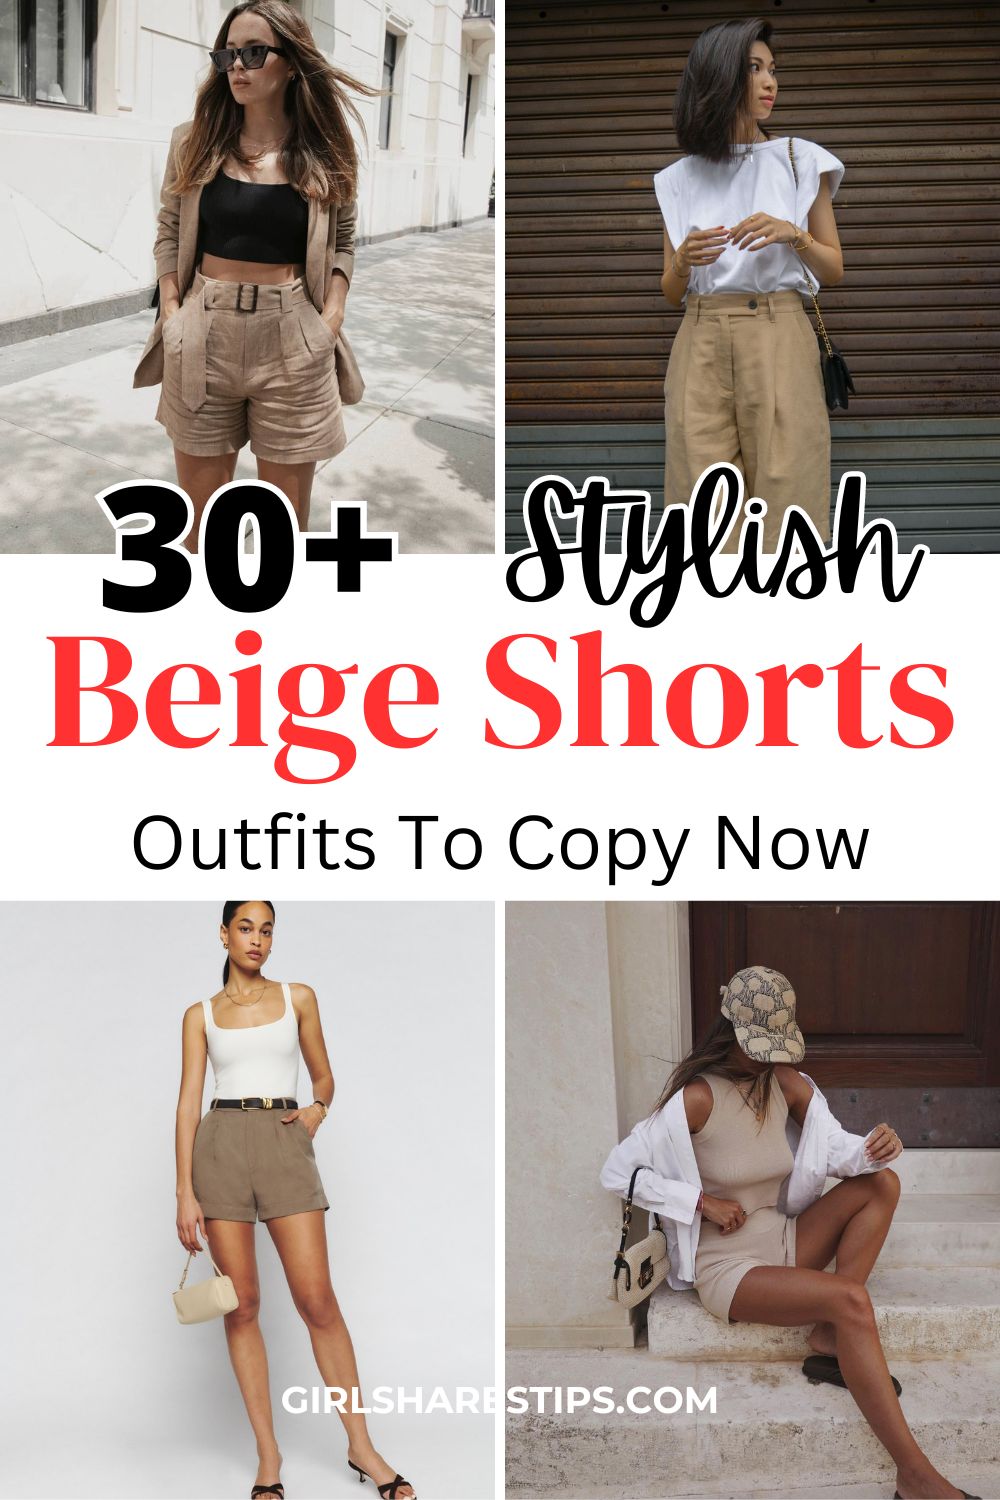 beige shorts outfit ideas collage